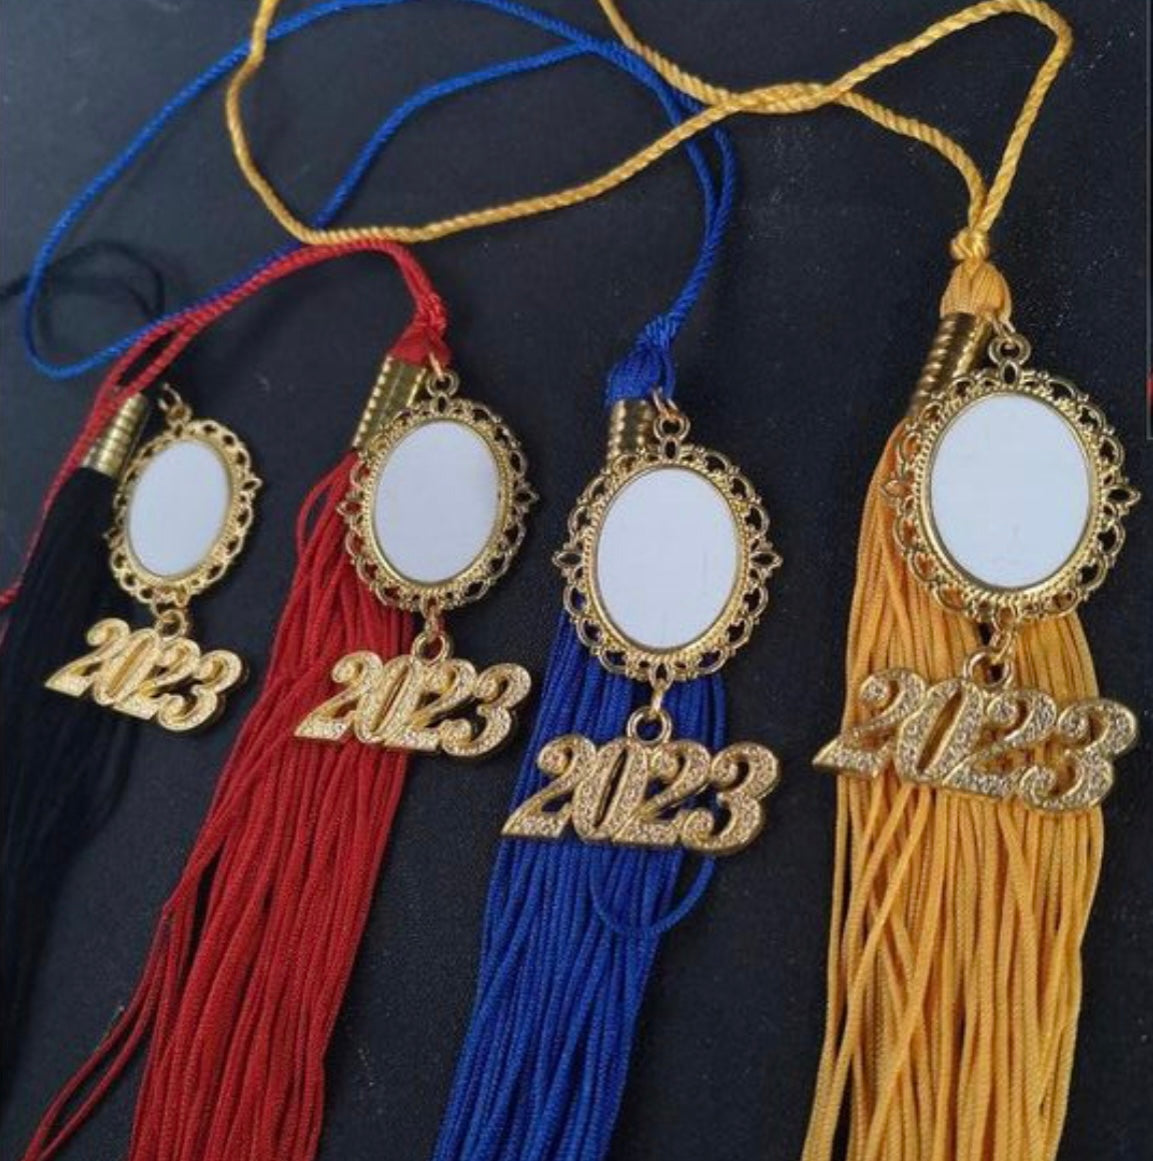 Double sided Sublimation Graduation cap charm with tassel